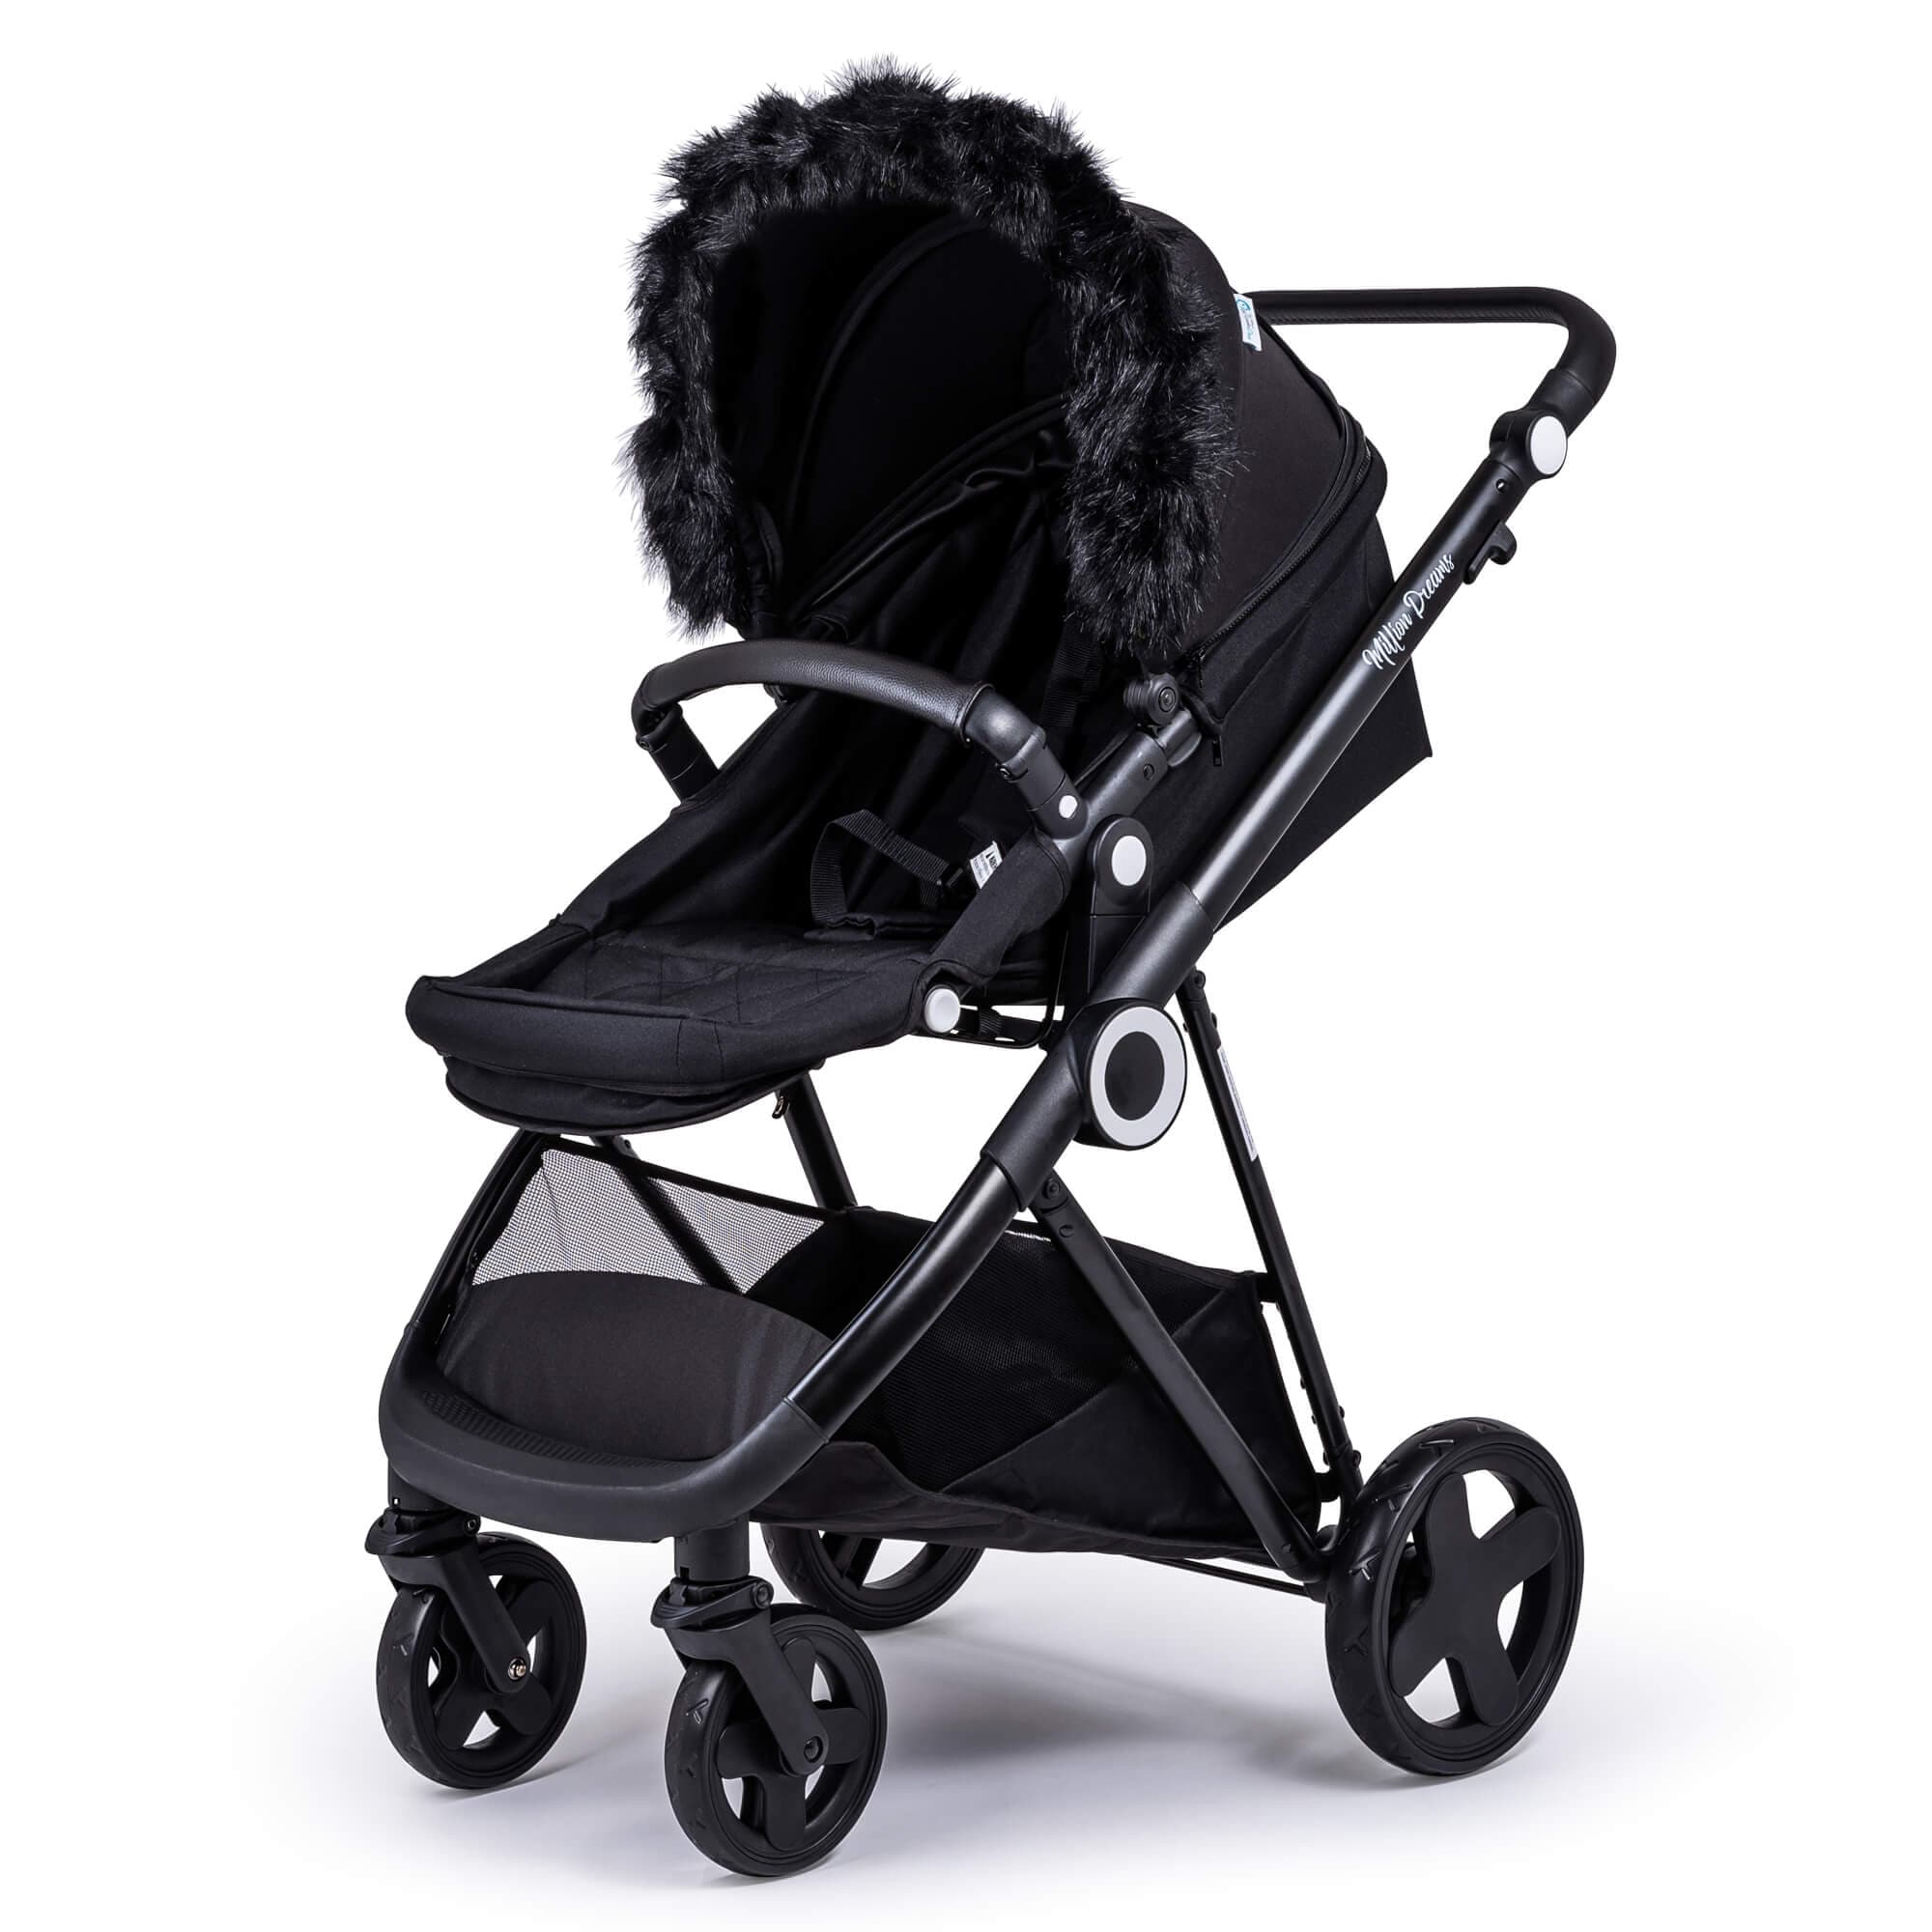 Pram Fur Hood Trim Attachment for Pushchair - Black / Fits All Models | For Your Little One